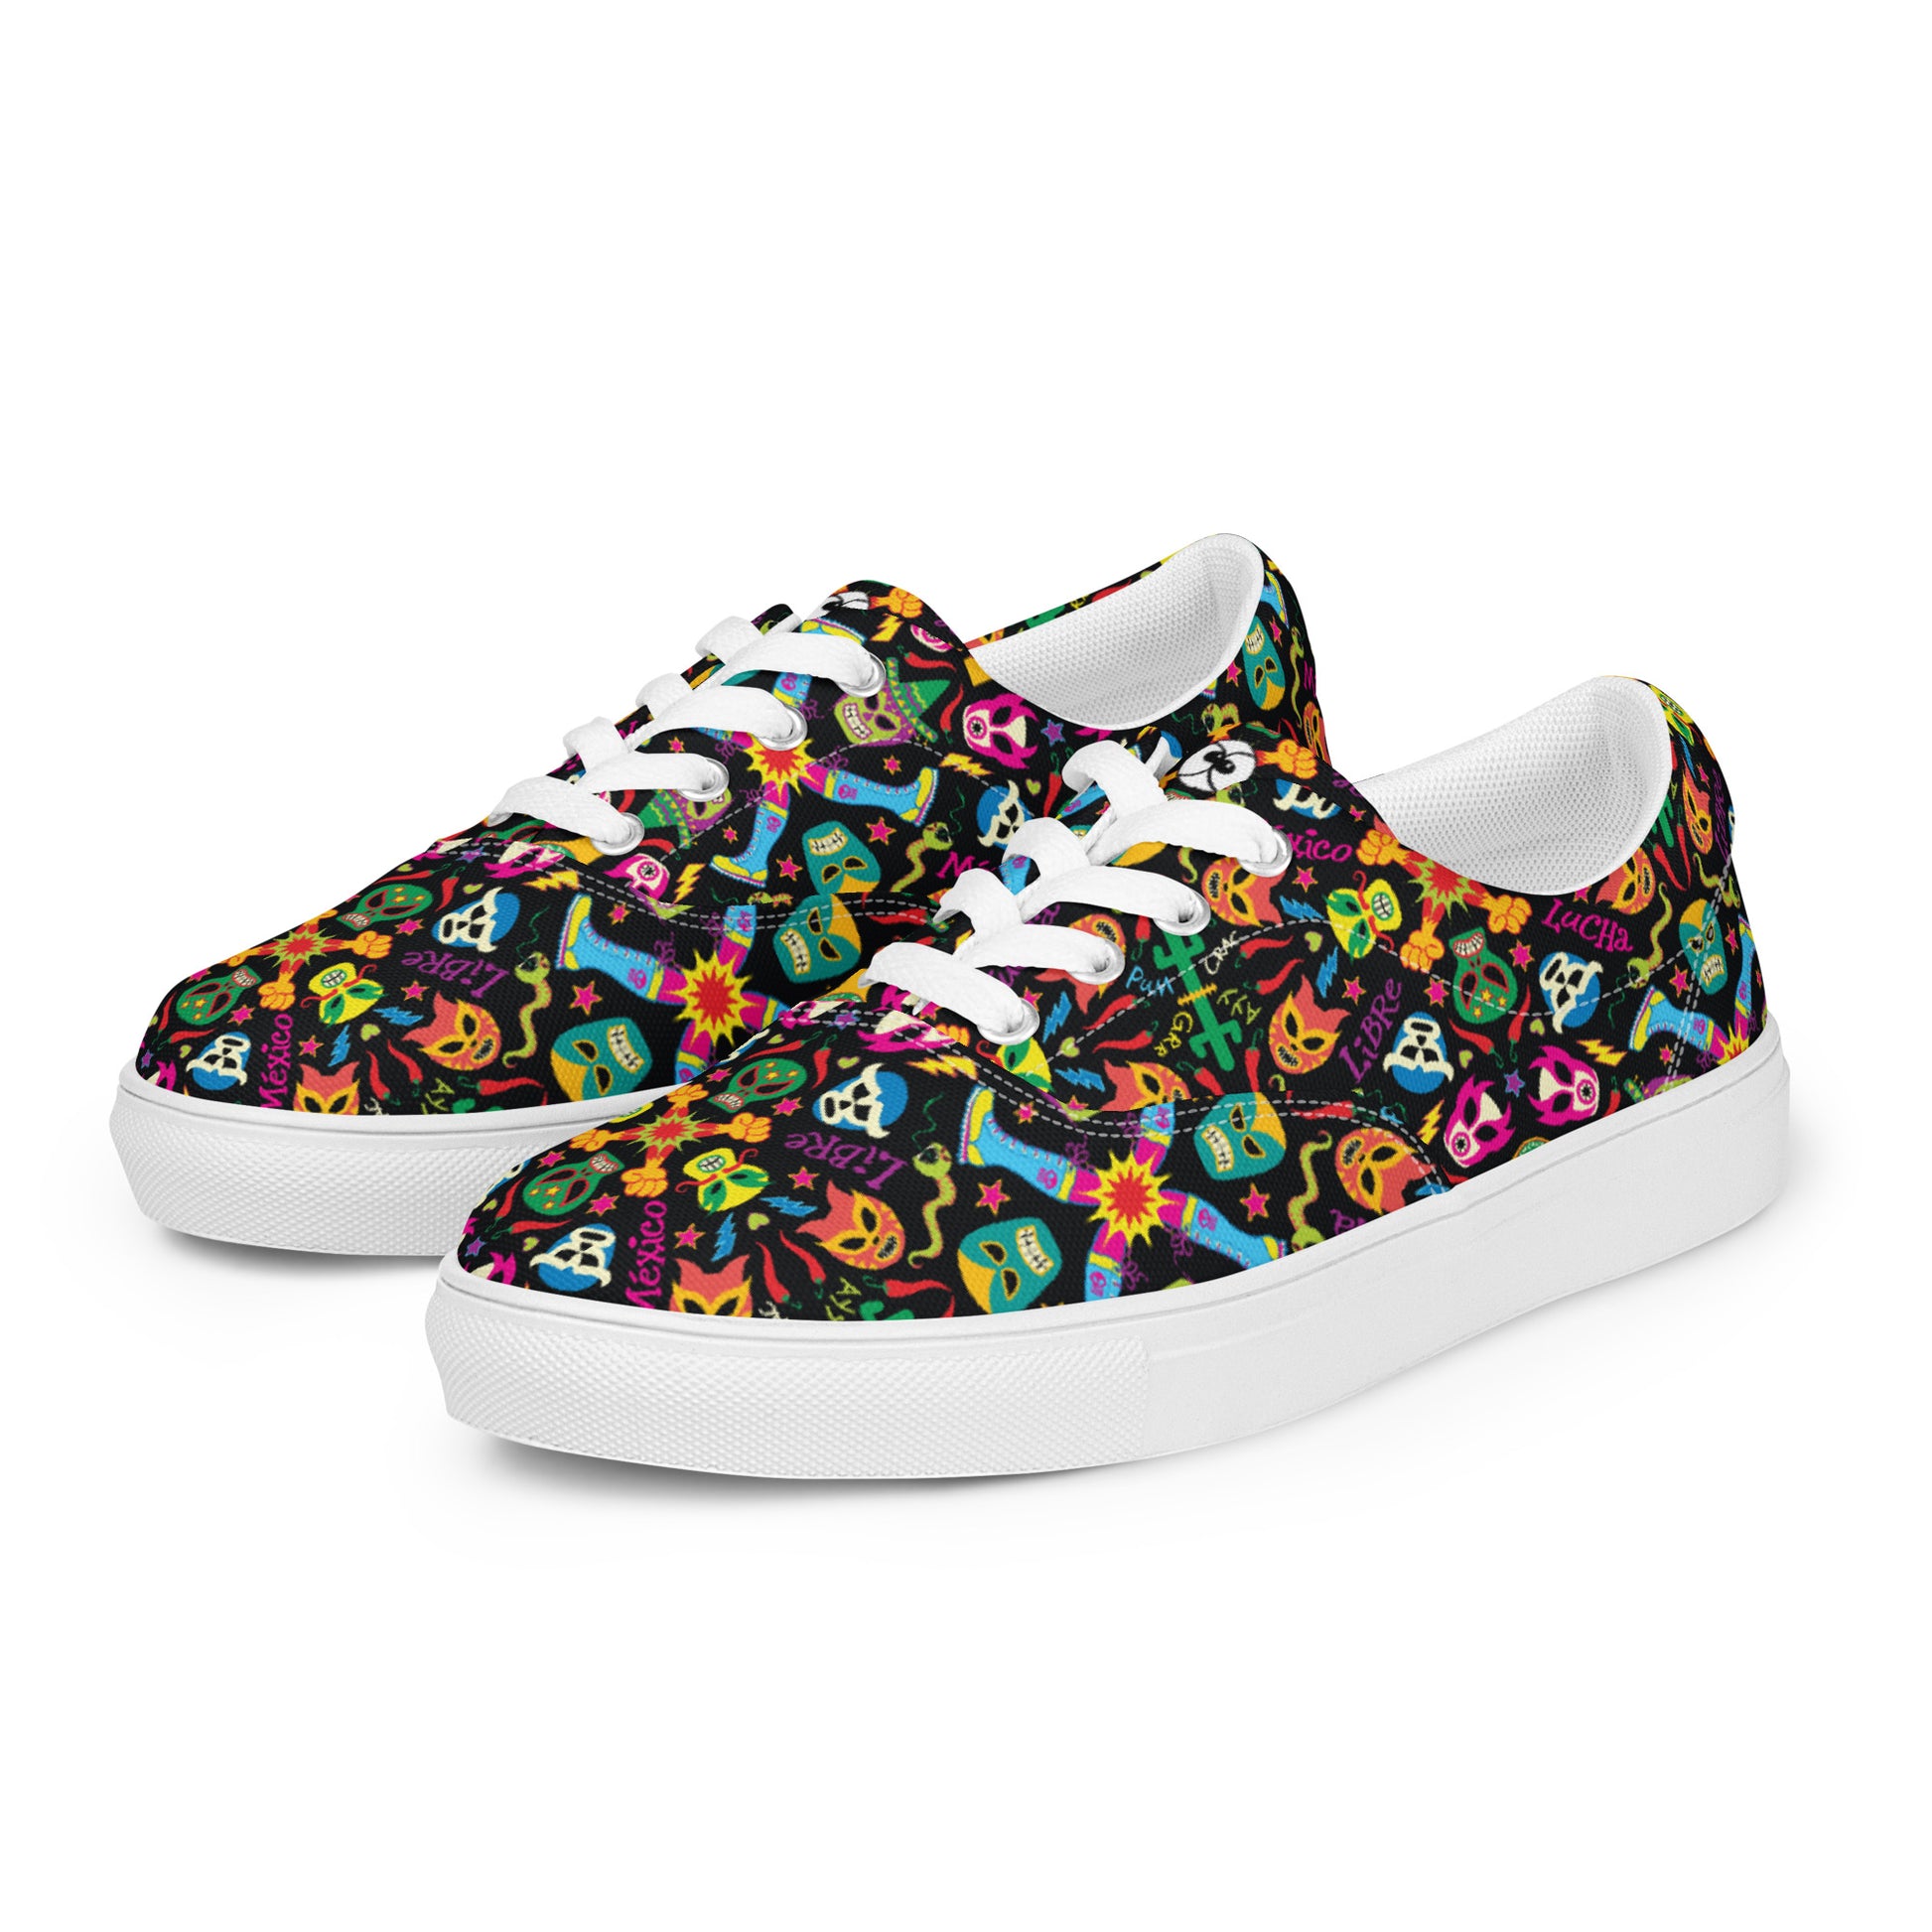 Mexican wrestling colorful party Men’s lace-up canvas shoes. Overview